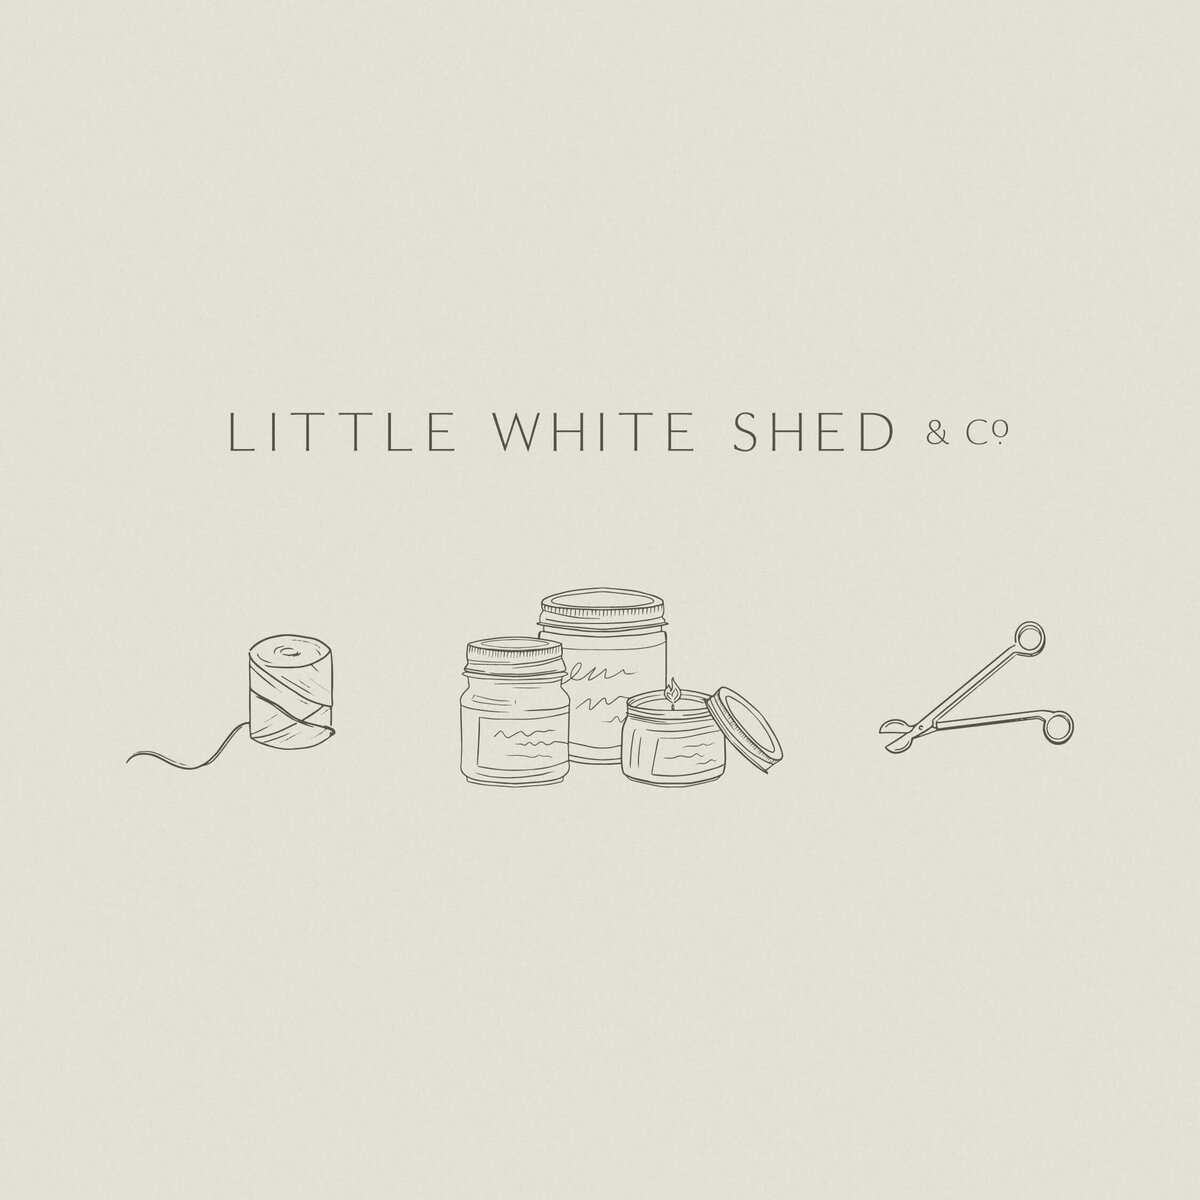 LittleWhiteShed&Co_LaunchGraphics-Instagram25